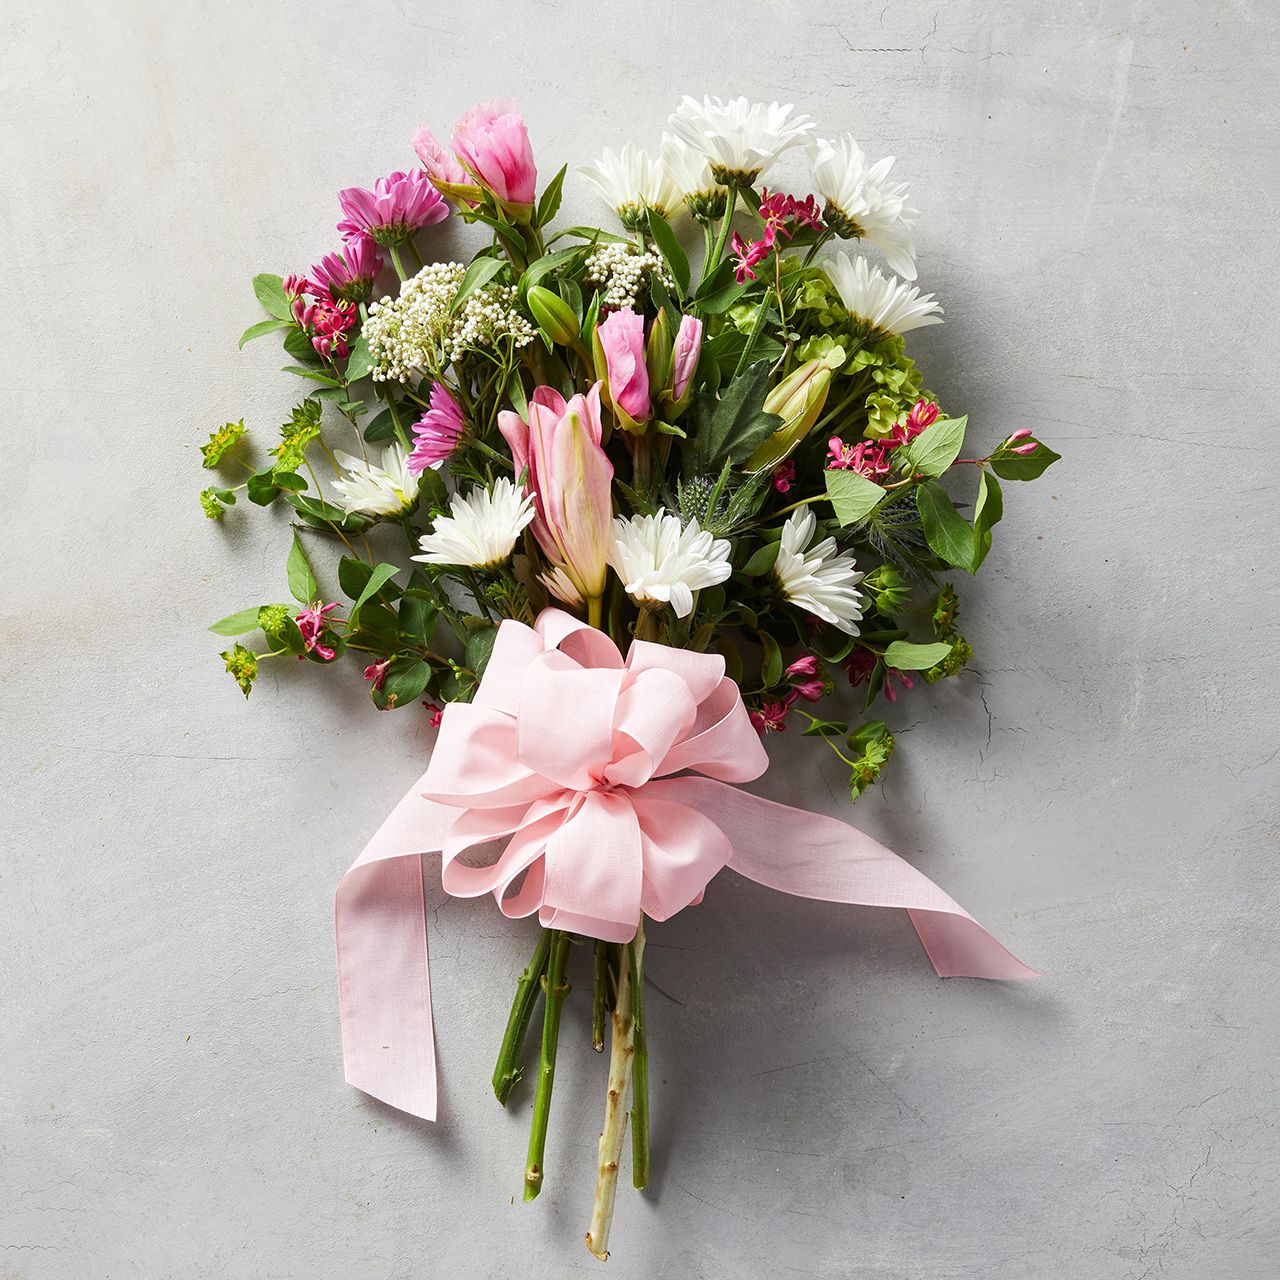 How To Make Bows For Floral Arrangements